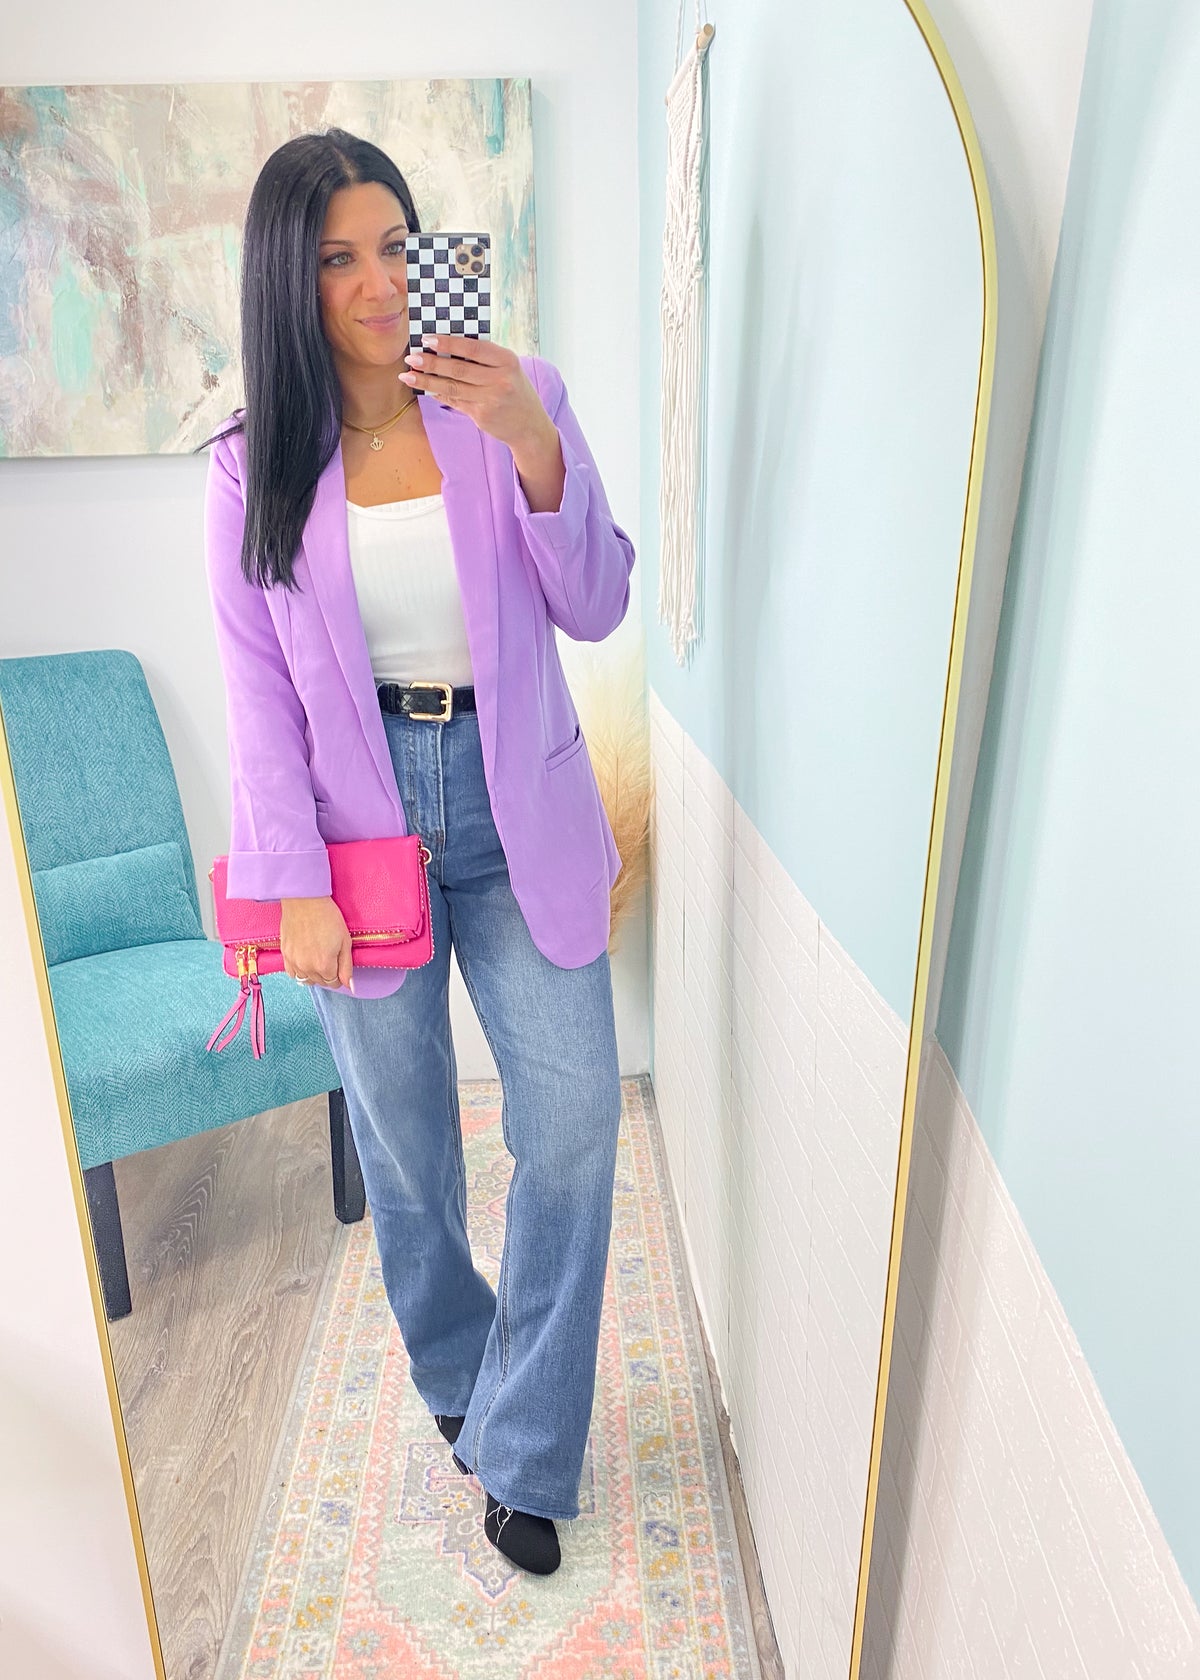 'New Bloom' Bold Lavender Blazer-Spice up your shirt collection with this pink dip dyed button front. Lightweight fabric that can be worn alone for Spring/Summer &amp; layered in the Fall. Wear alone or unbuttoned as a layering piece!-Cali Moon Boutique, Plainville Connecticut